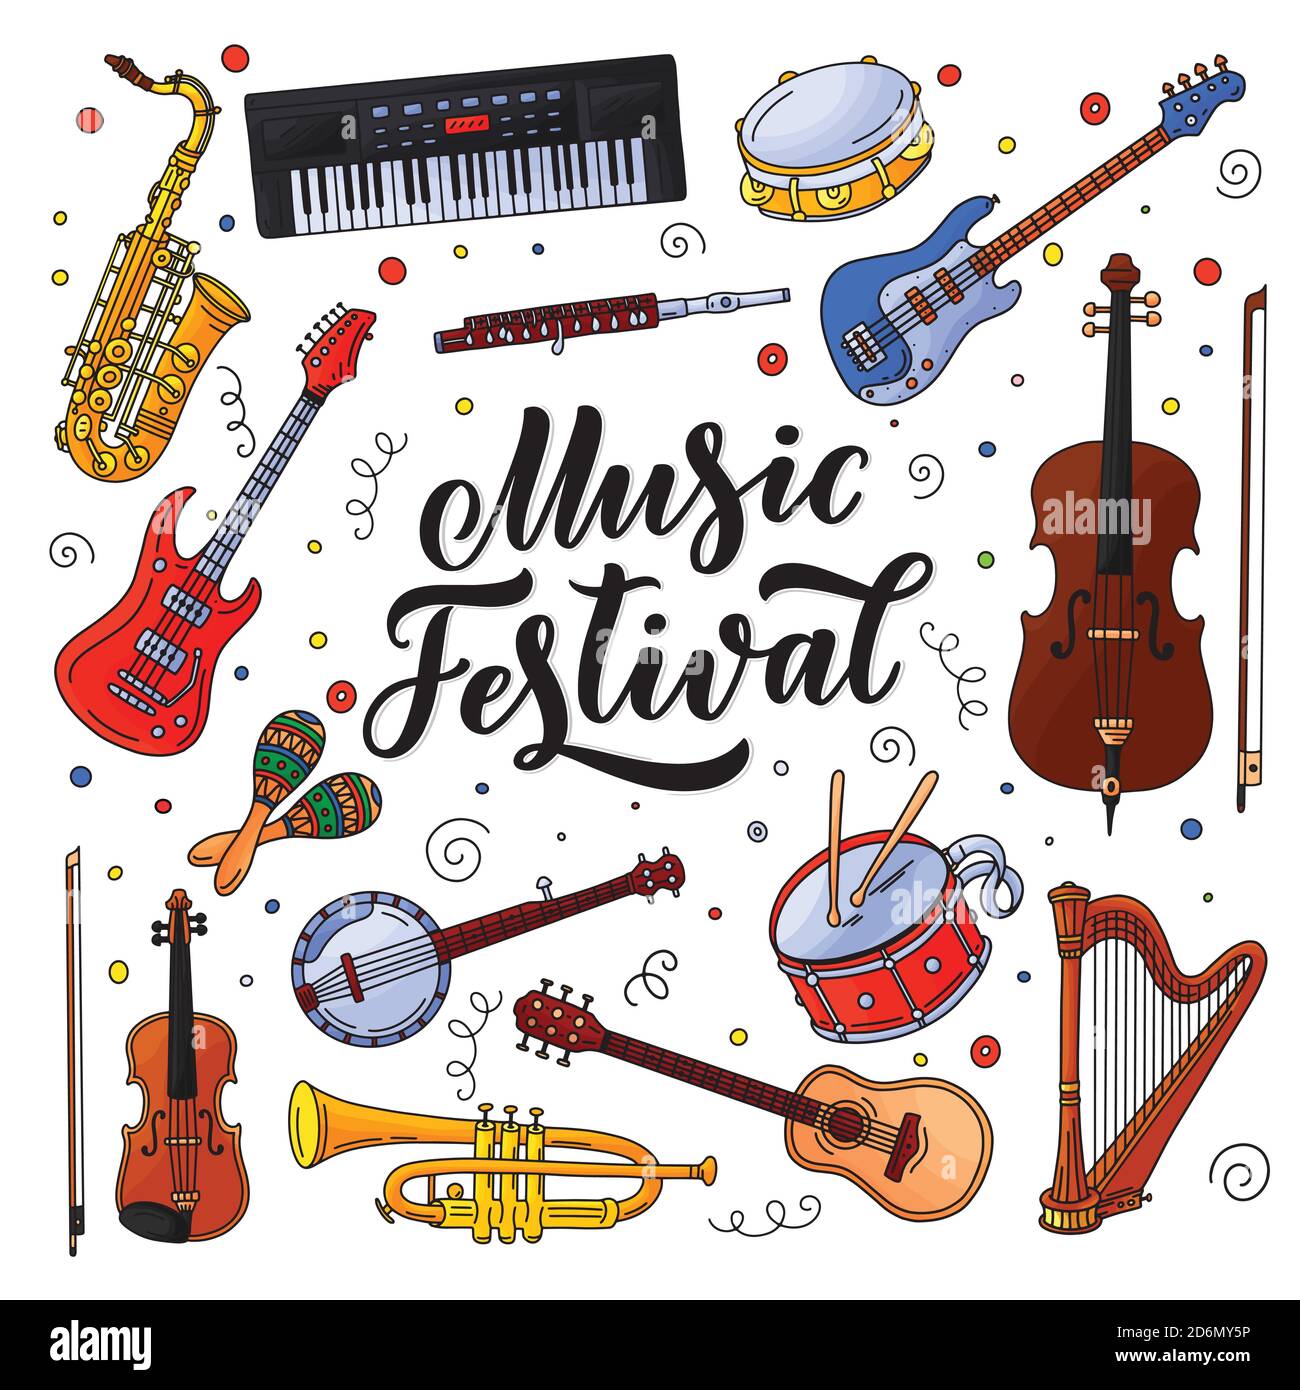 Music festival banner or poster design elements. Vector doodle style illustration. Hand drawn calligraphy lettering, jazz and rock music instruments, Stock Vector